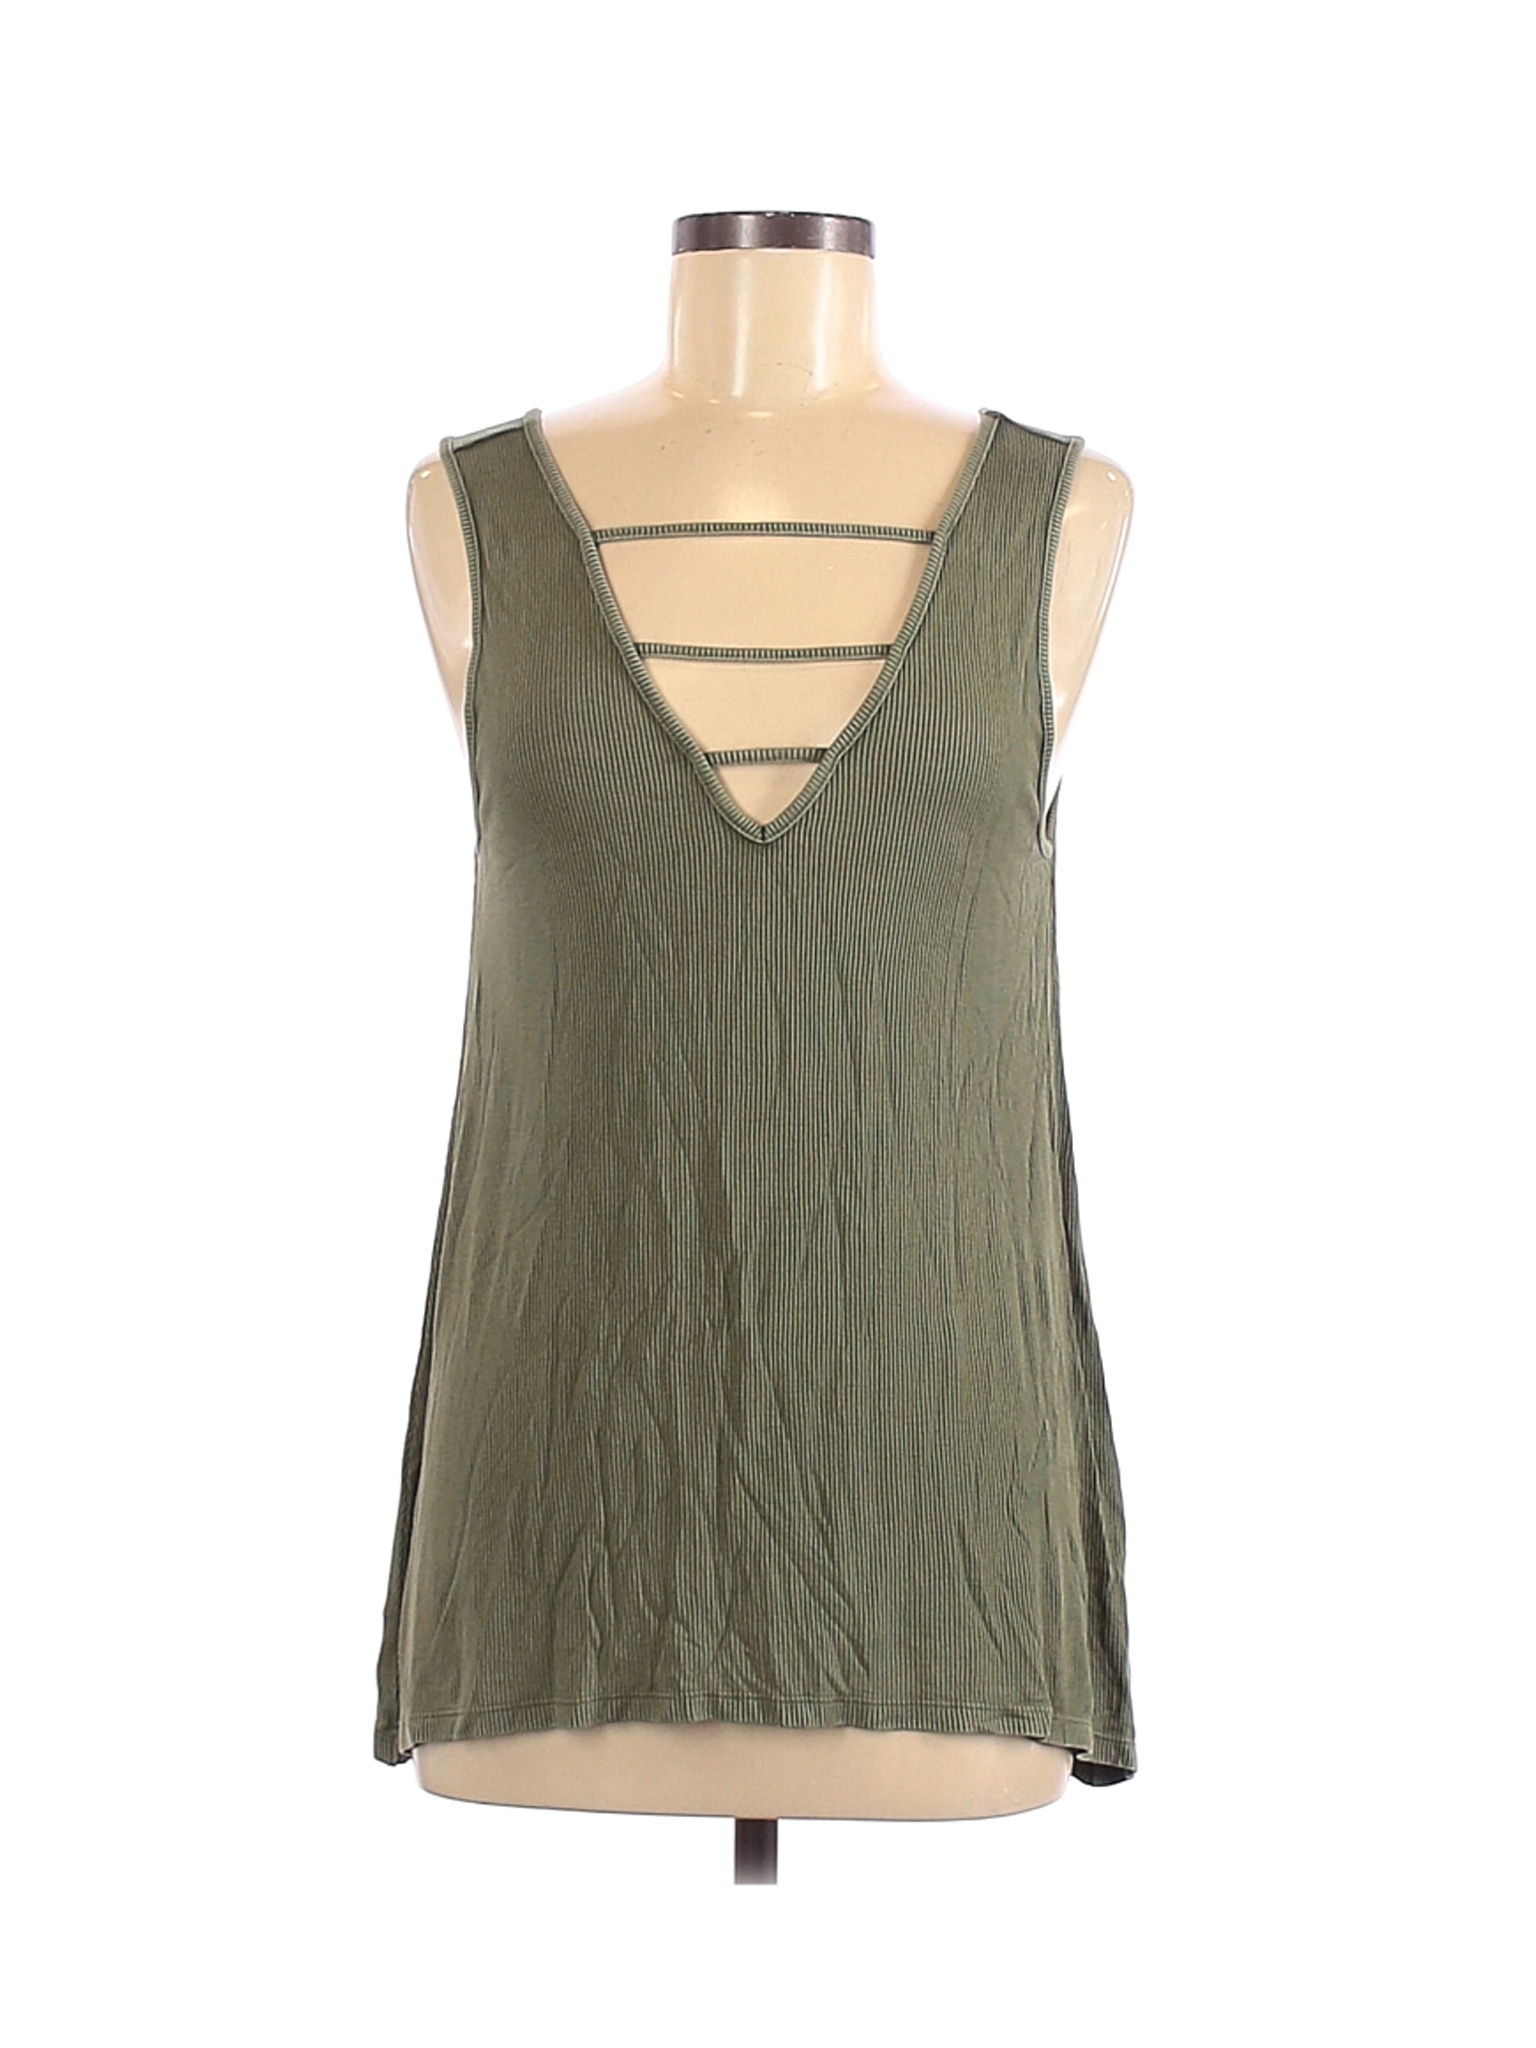 American Eagle Outfitters Women Green Casual Dress M | eBay